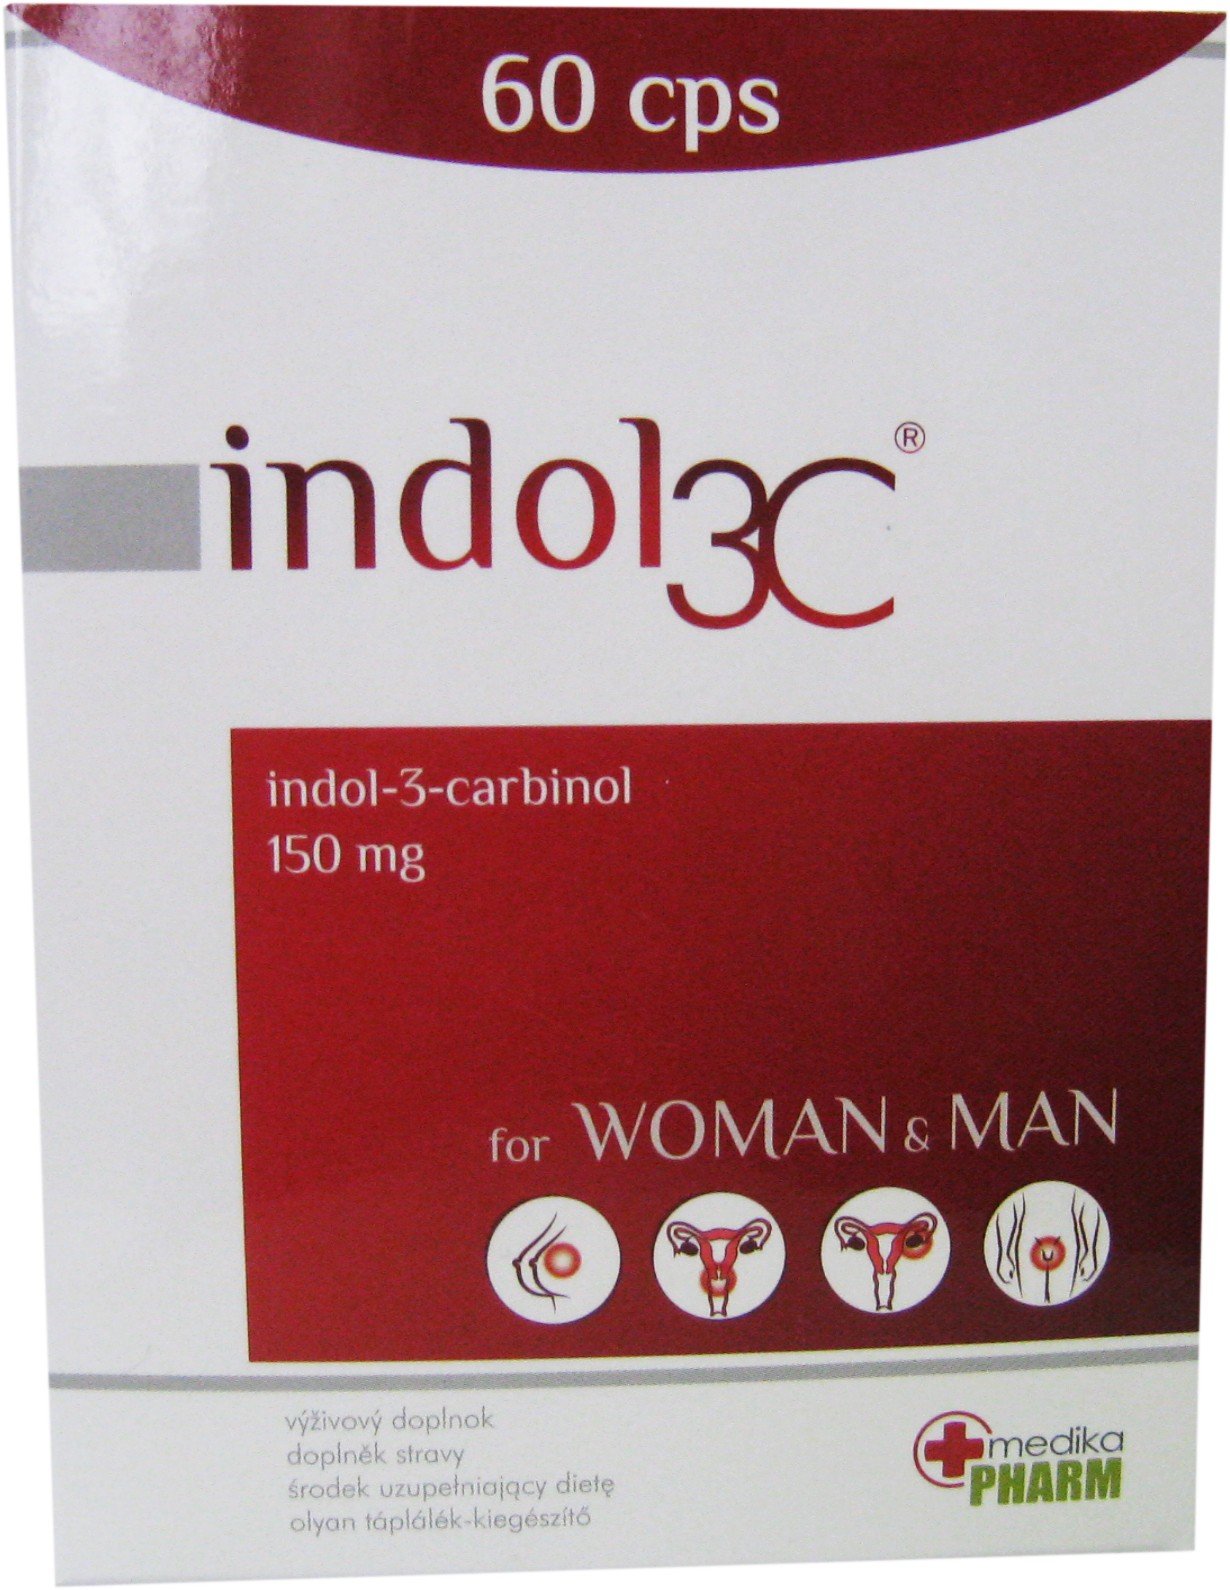 E-shop Indol 3C for Woman and Man 150mg 60 cps